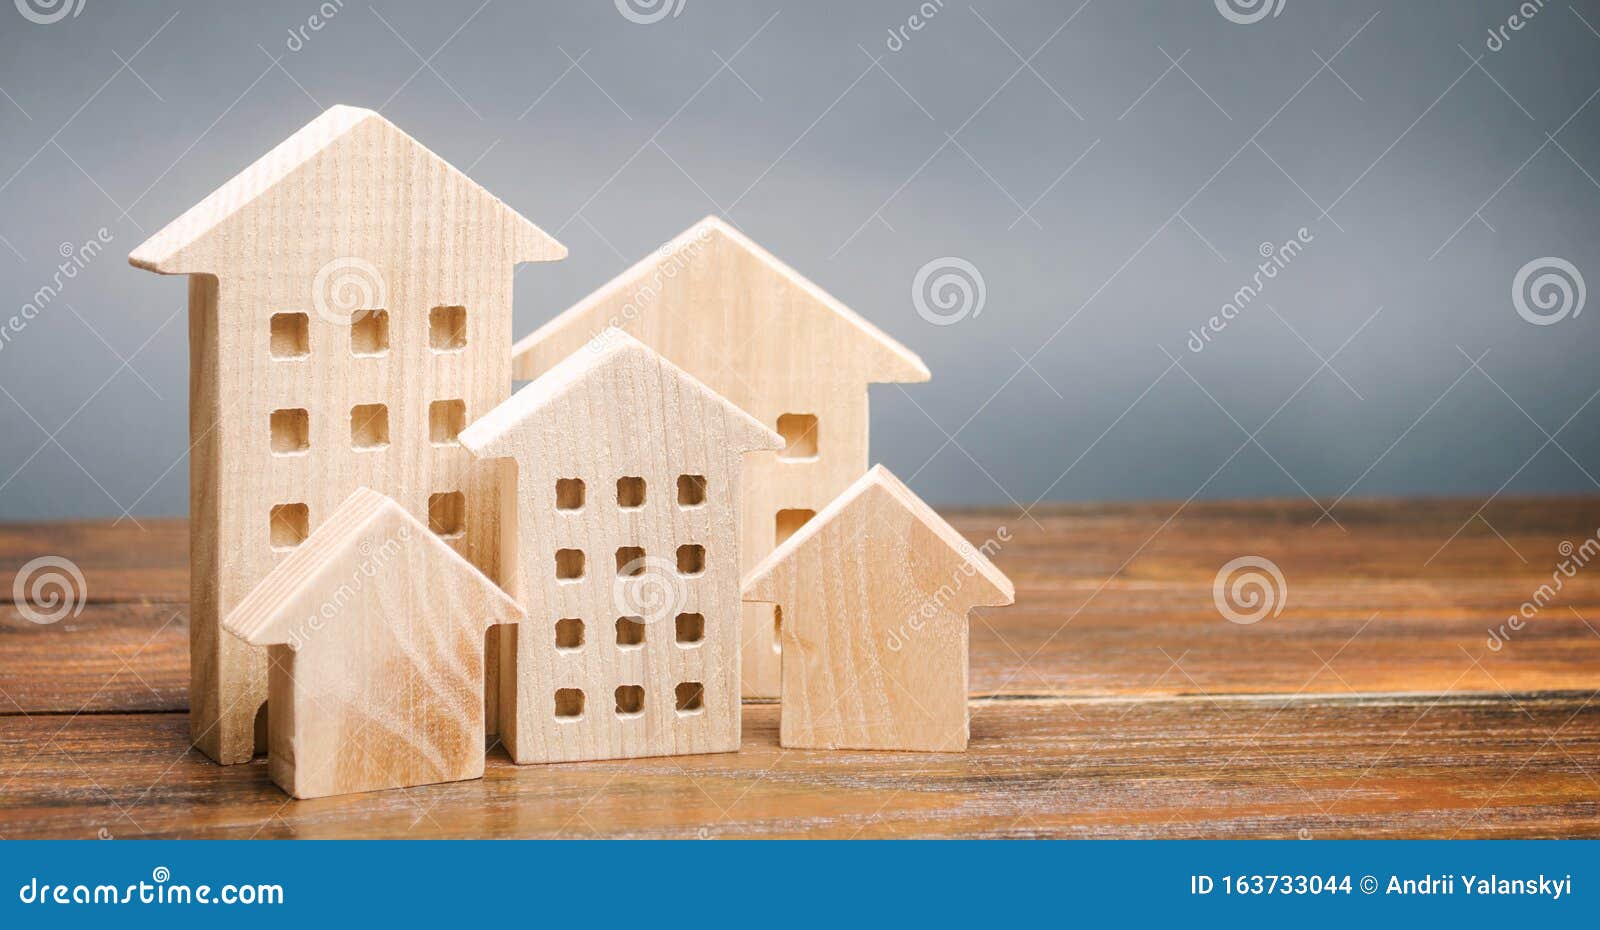 miniature wooden houses. real estate. city. agglomeration and urbanization. market analytics. demand for housing. rising and